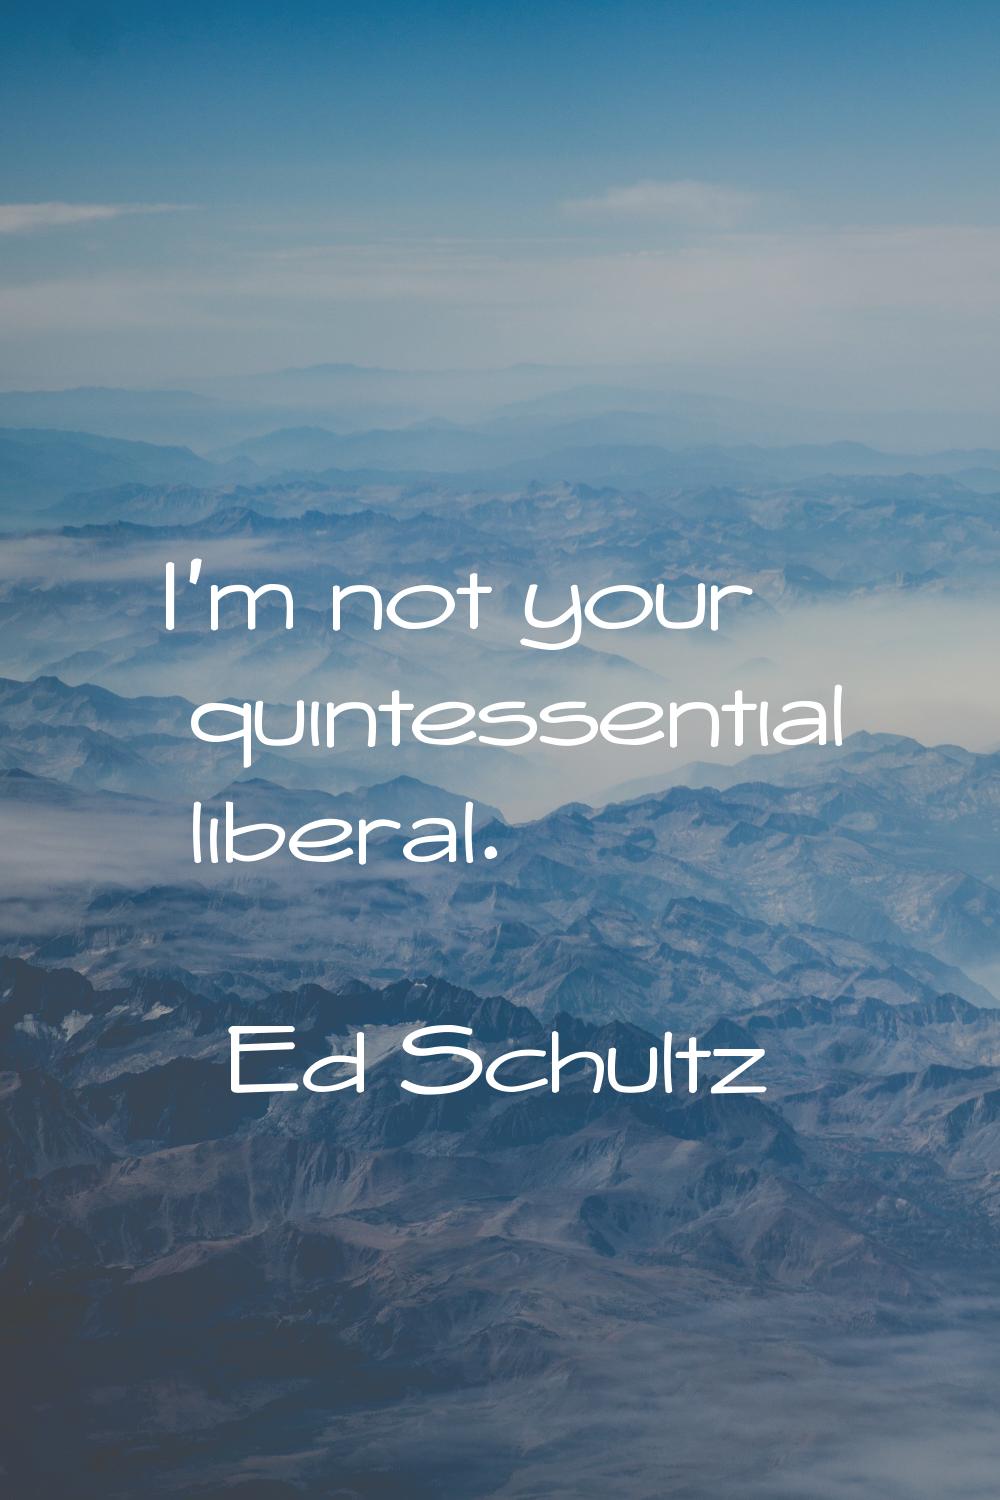 I'm not your quintessential liberal.